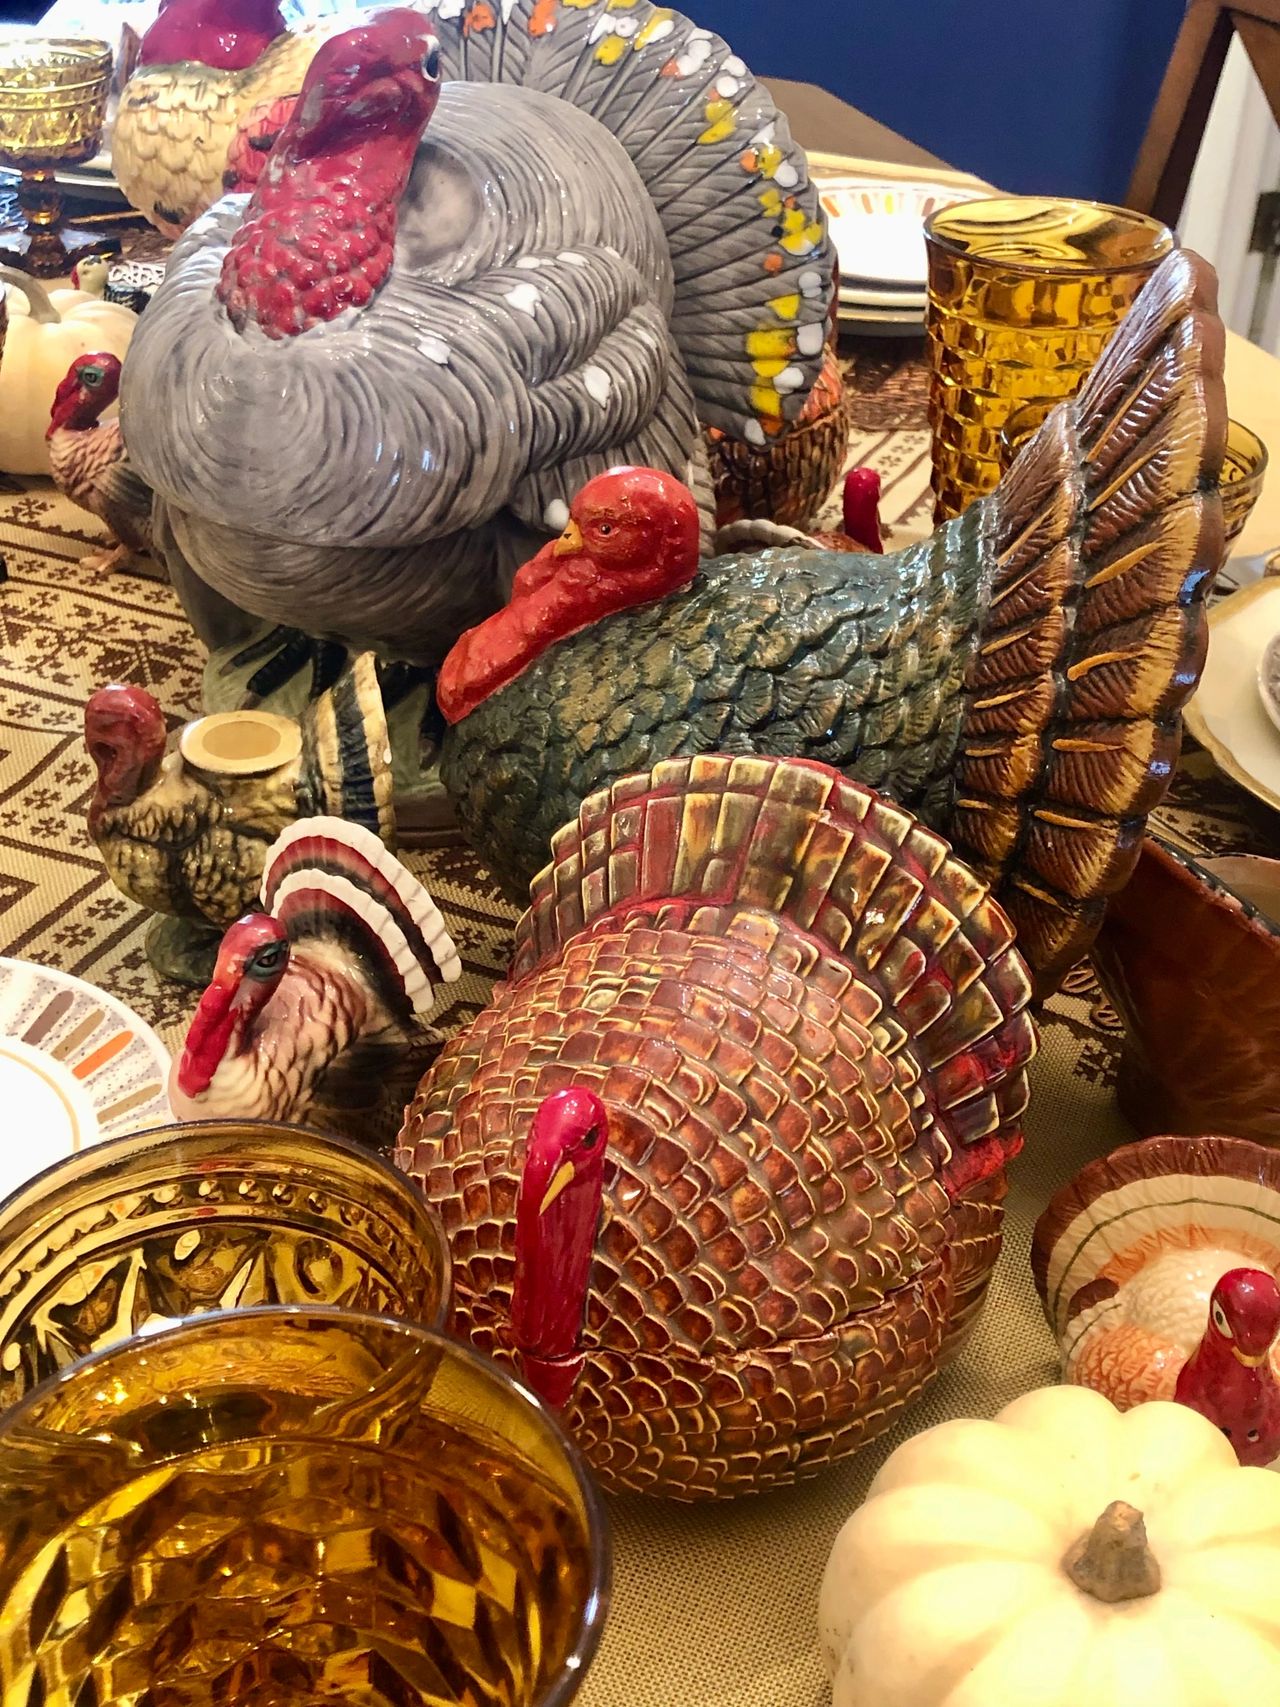 Ceramic turkeys lined up on a table